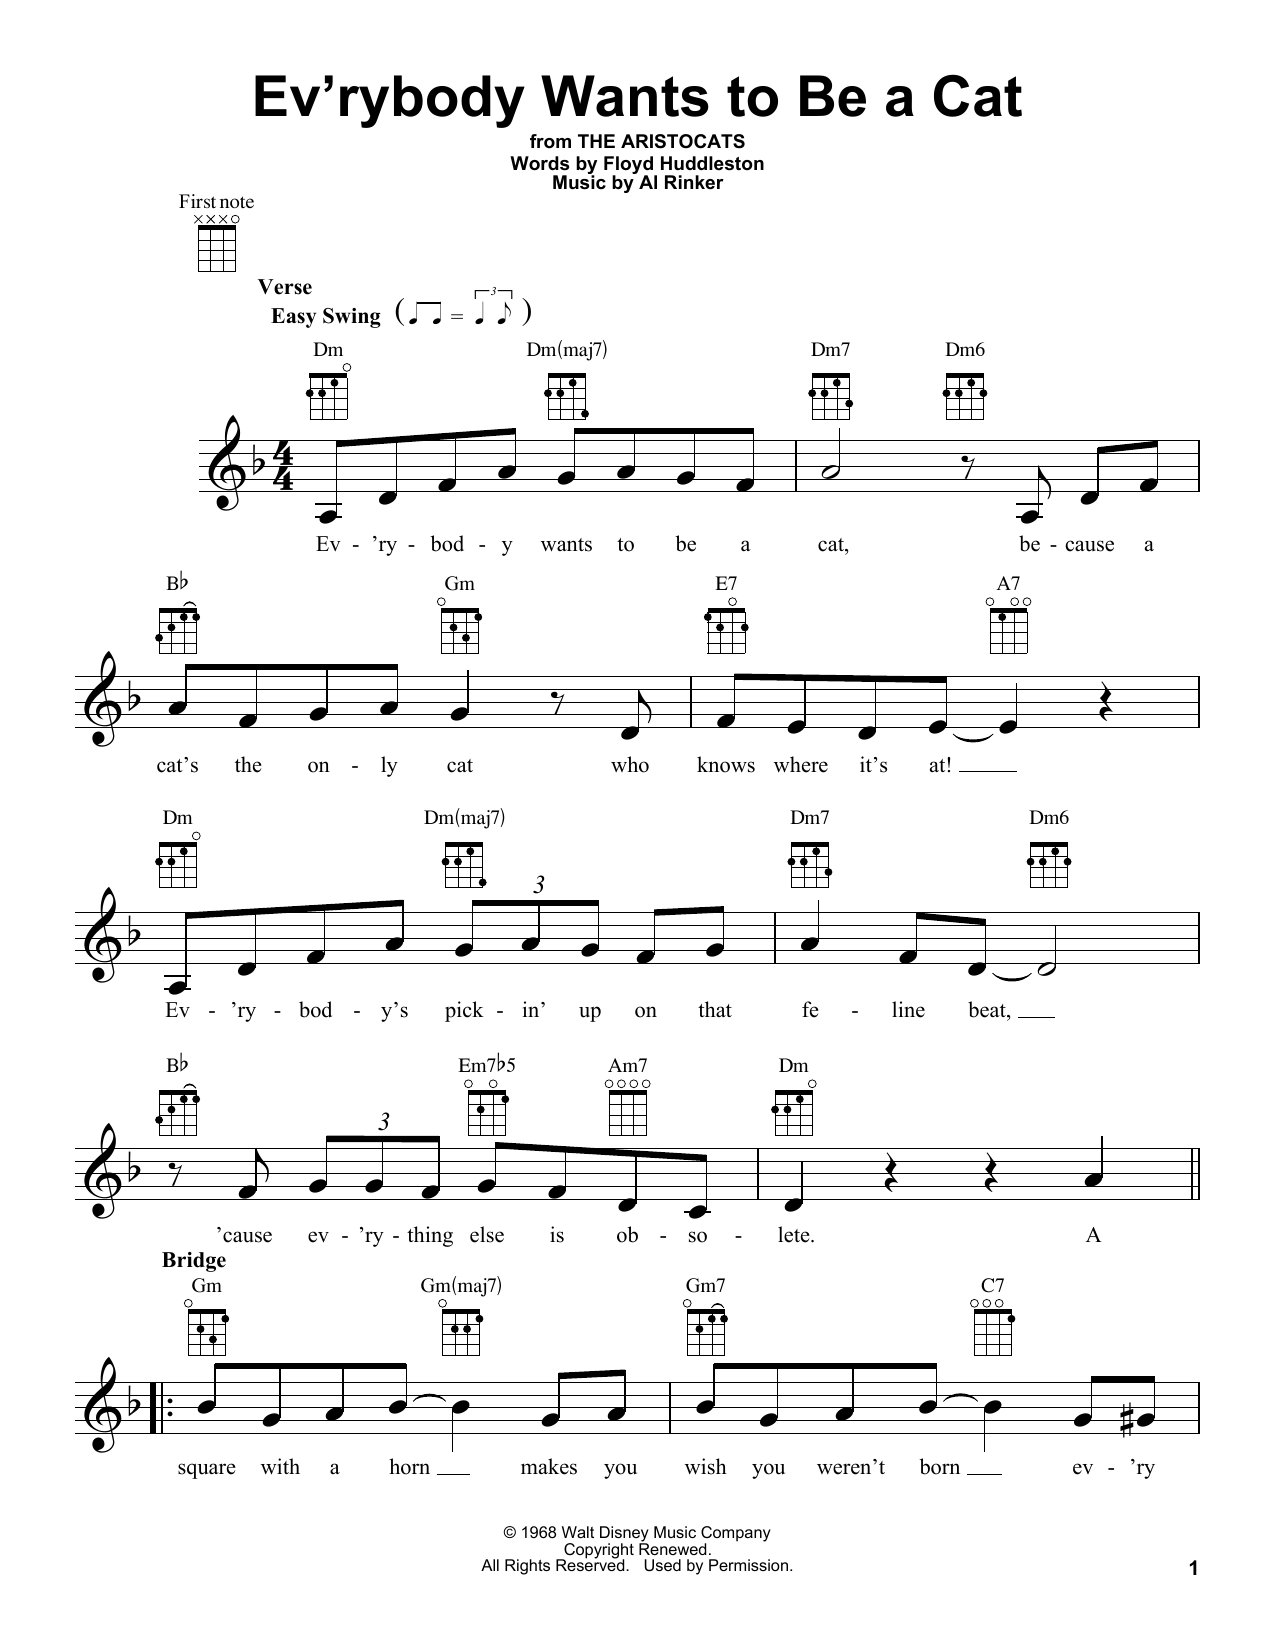 Download Al Rinker Ev'rybody Wants To Be A Cat Sheet Music